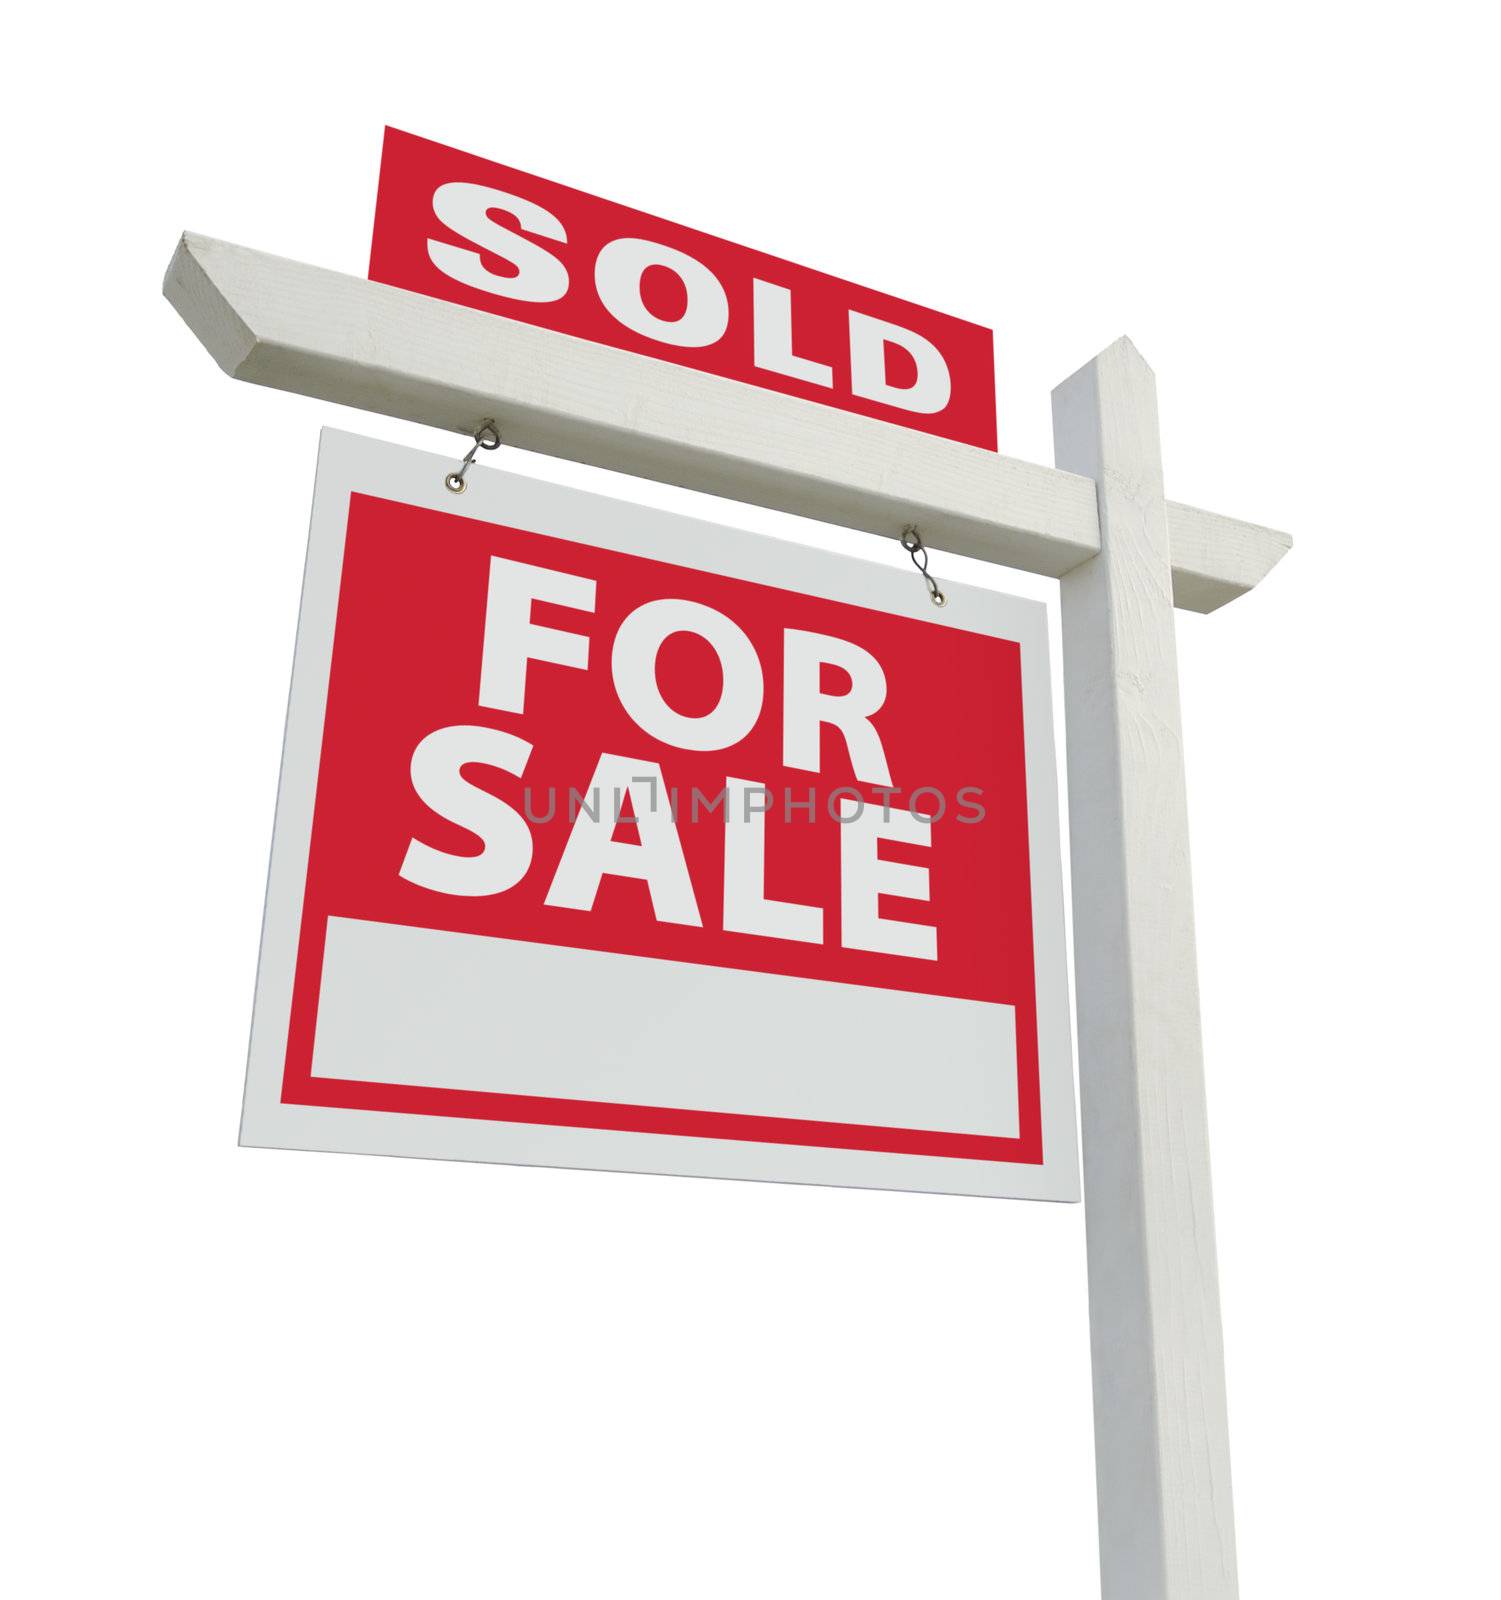 Sold For Sale Real Estate Sign Isolated on a White Background.